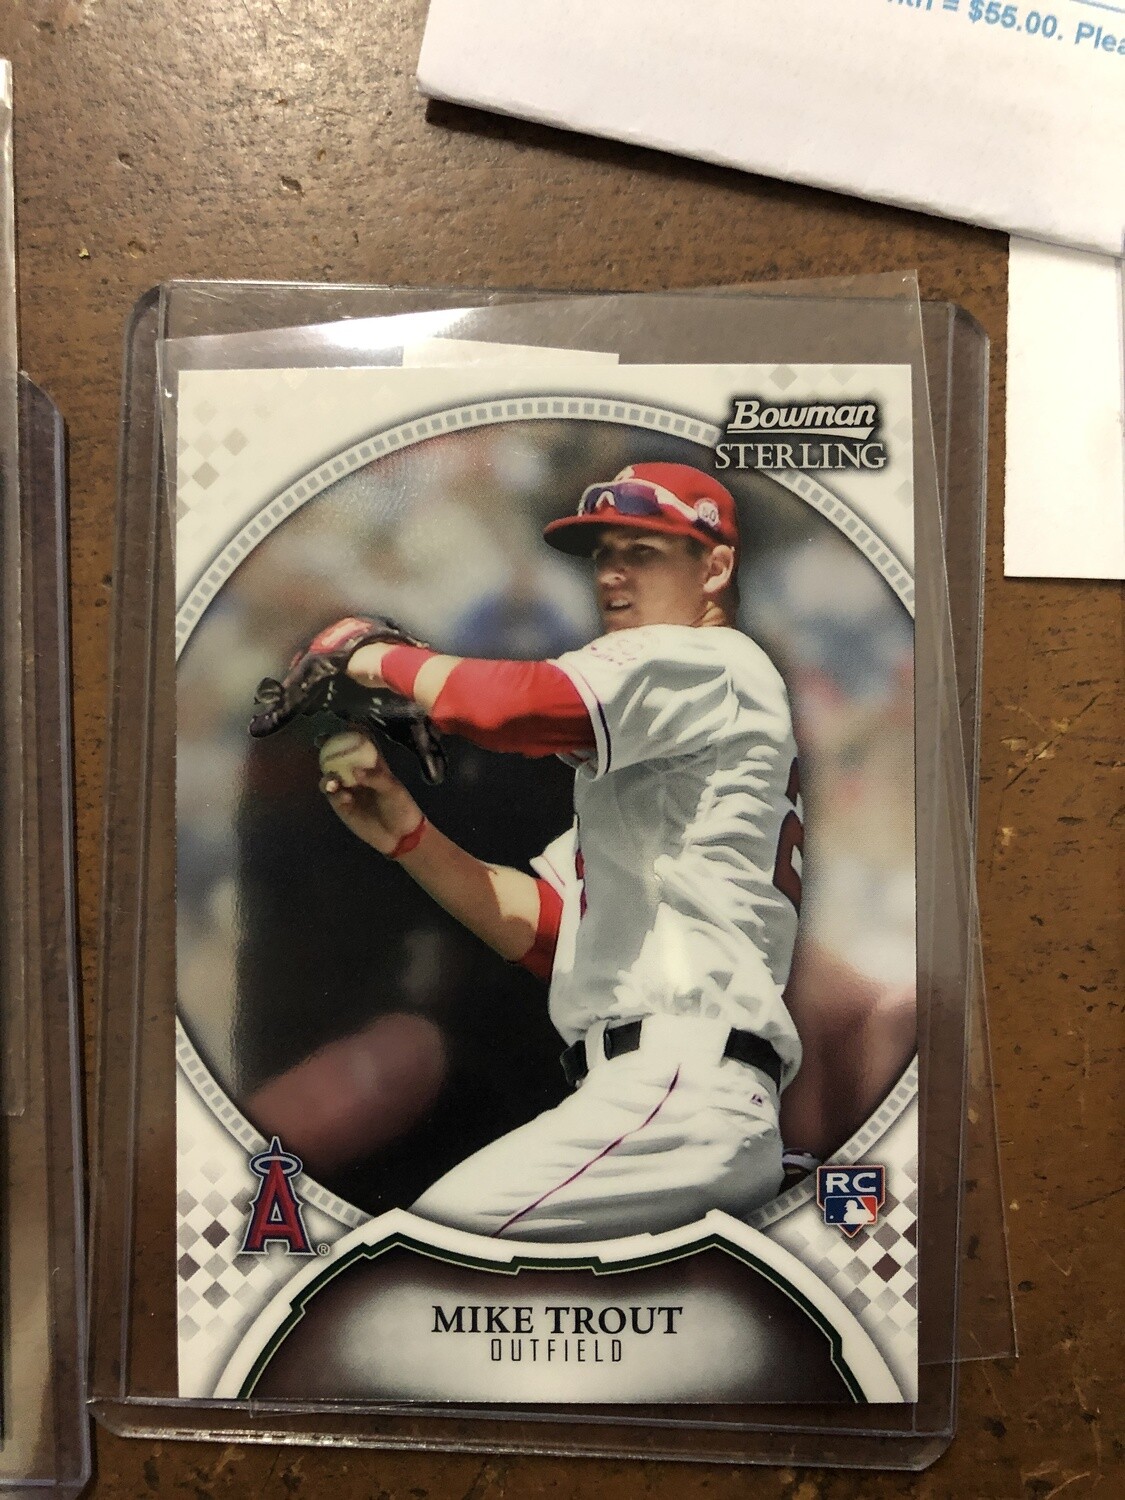 2011 Bowman Sterling Mike Trout rookie